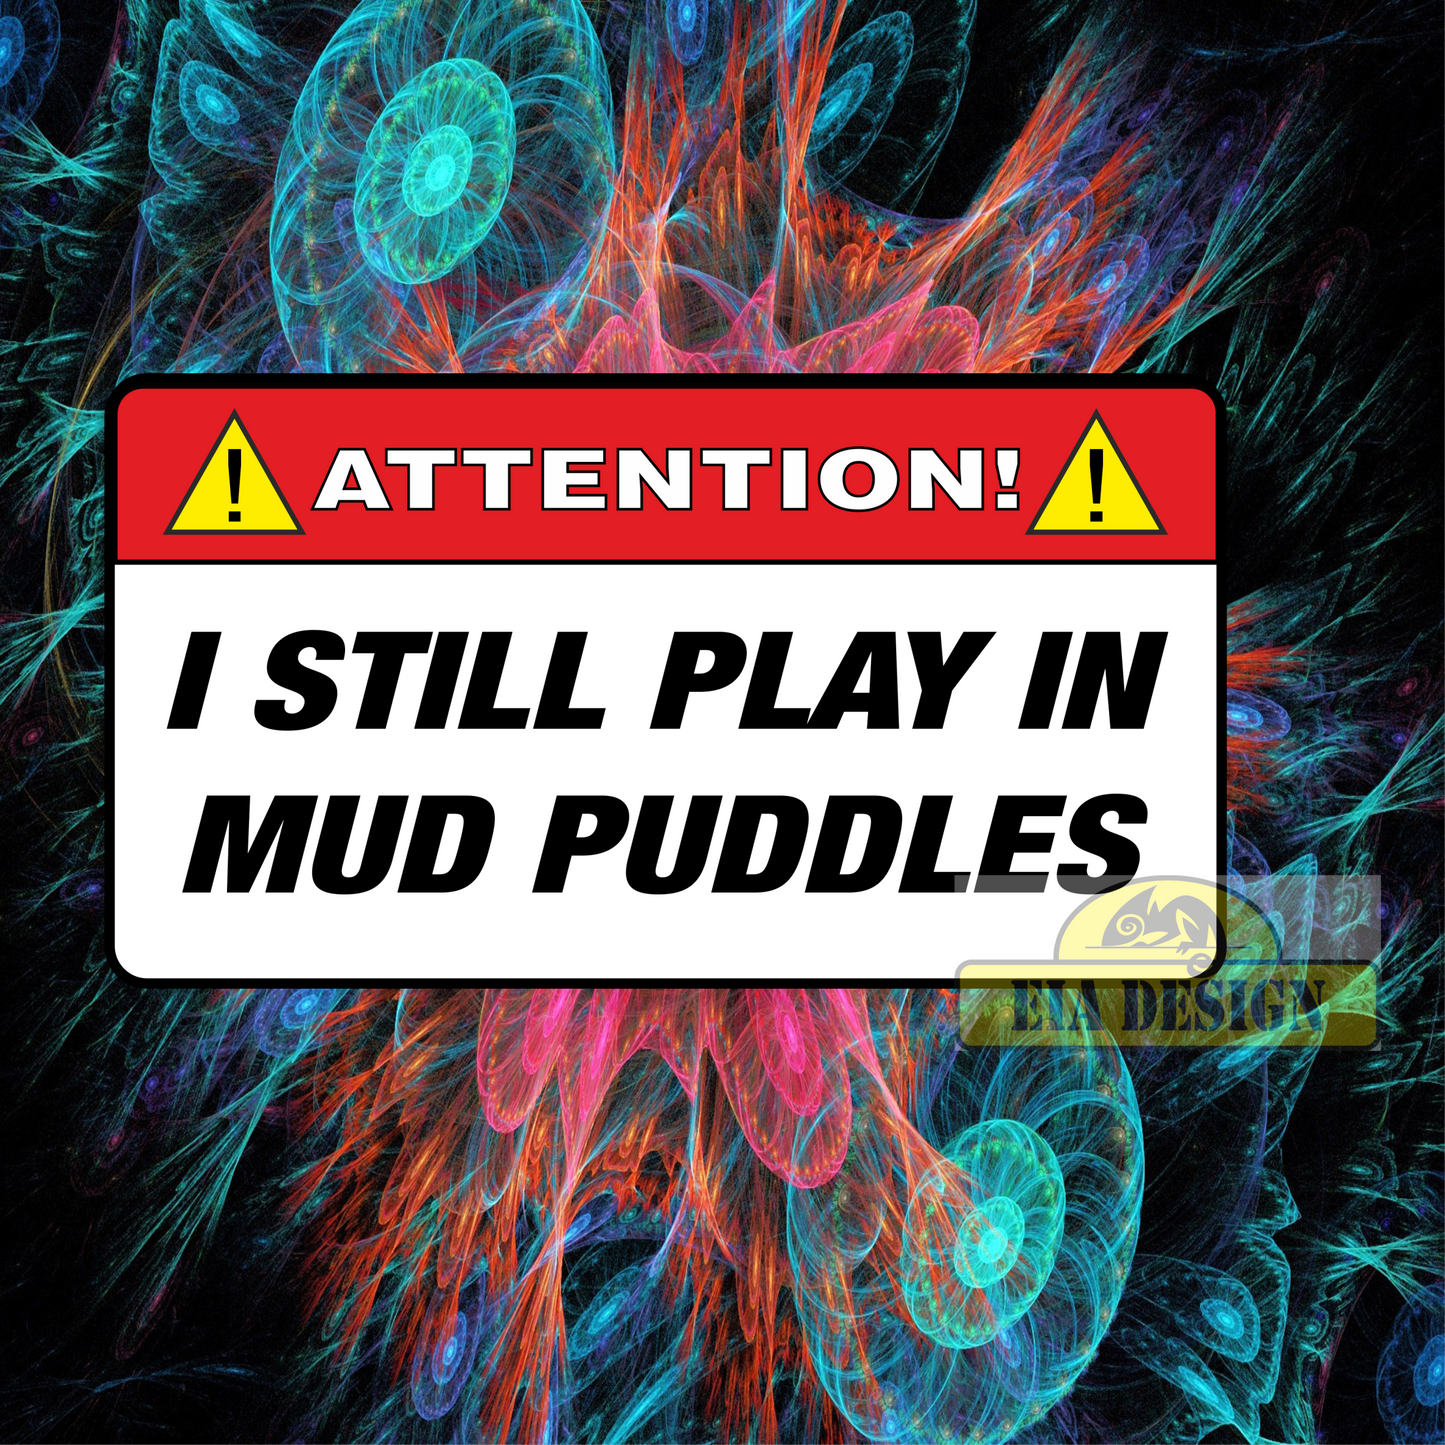 OFF ROAD FUNNY WARNING STICKERS - ATTENTION I STILL PLAY IN MUD PUDDLES